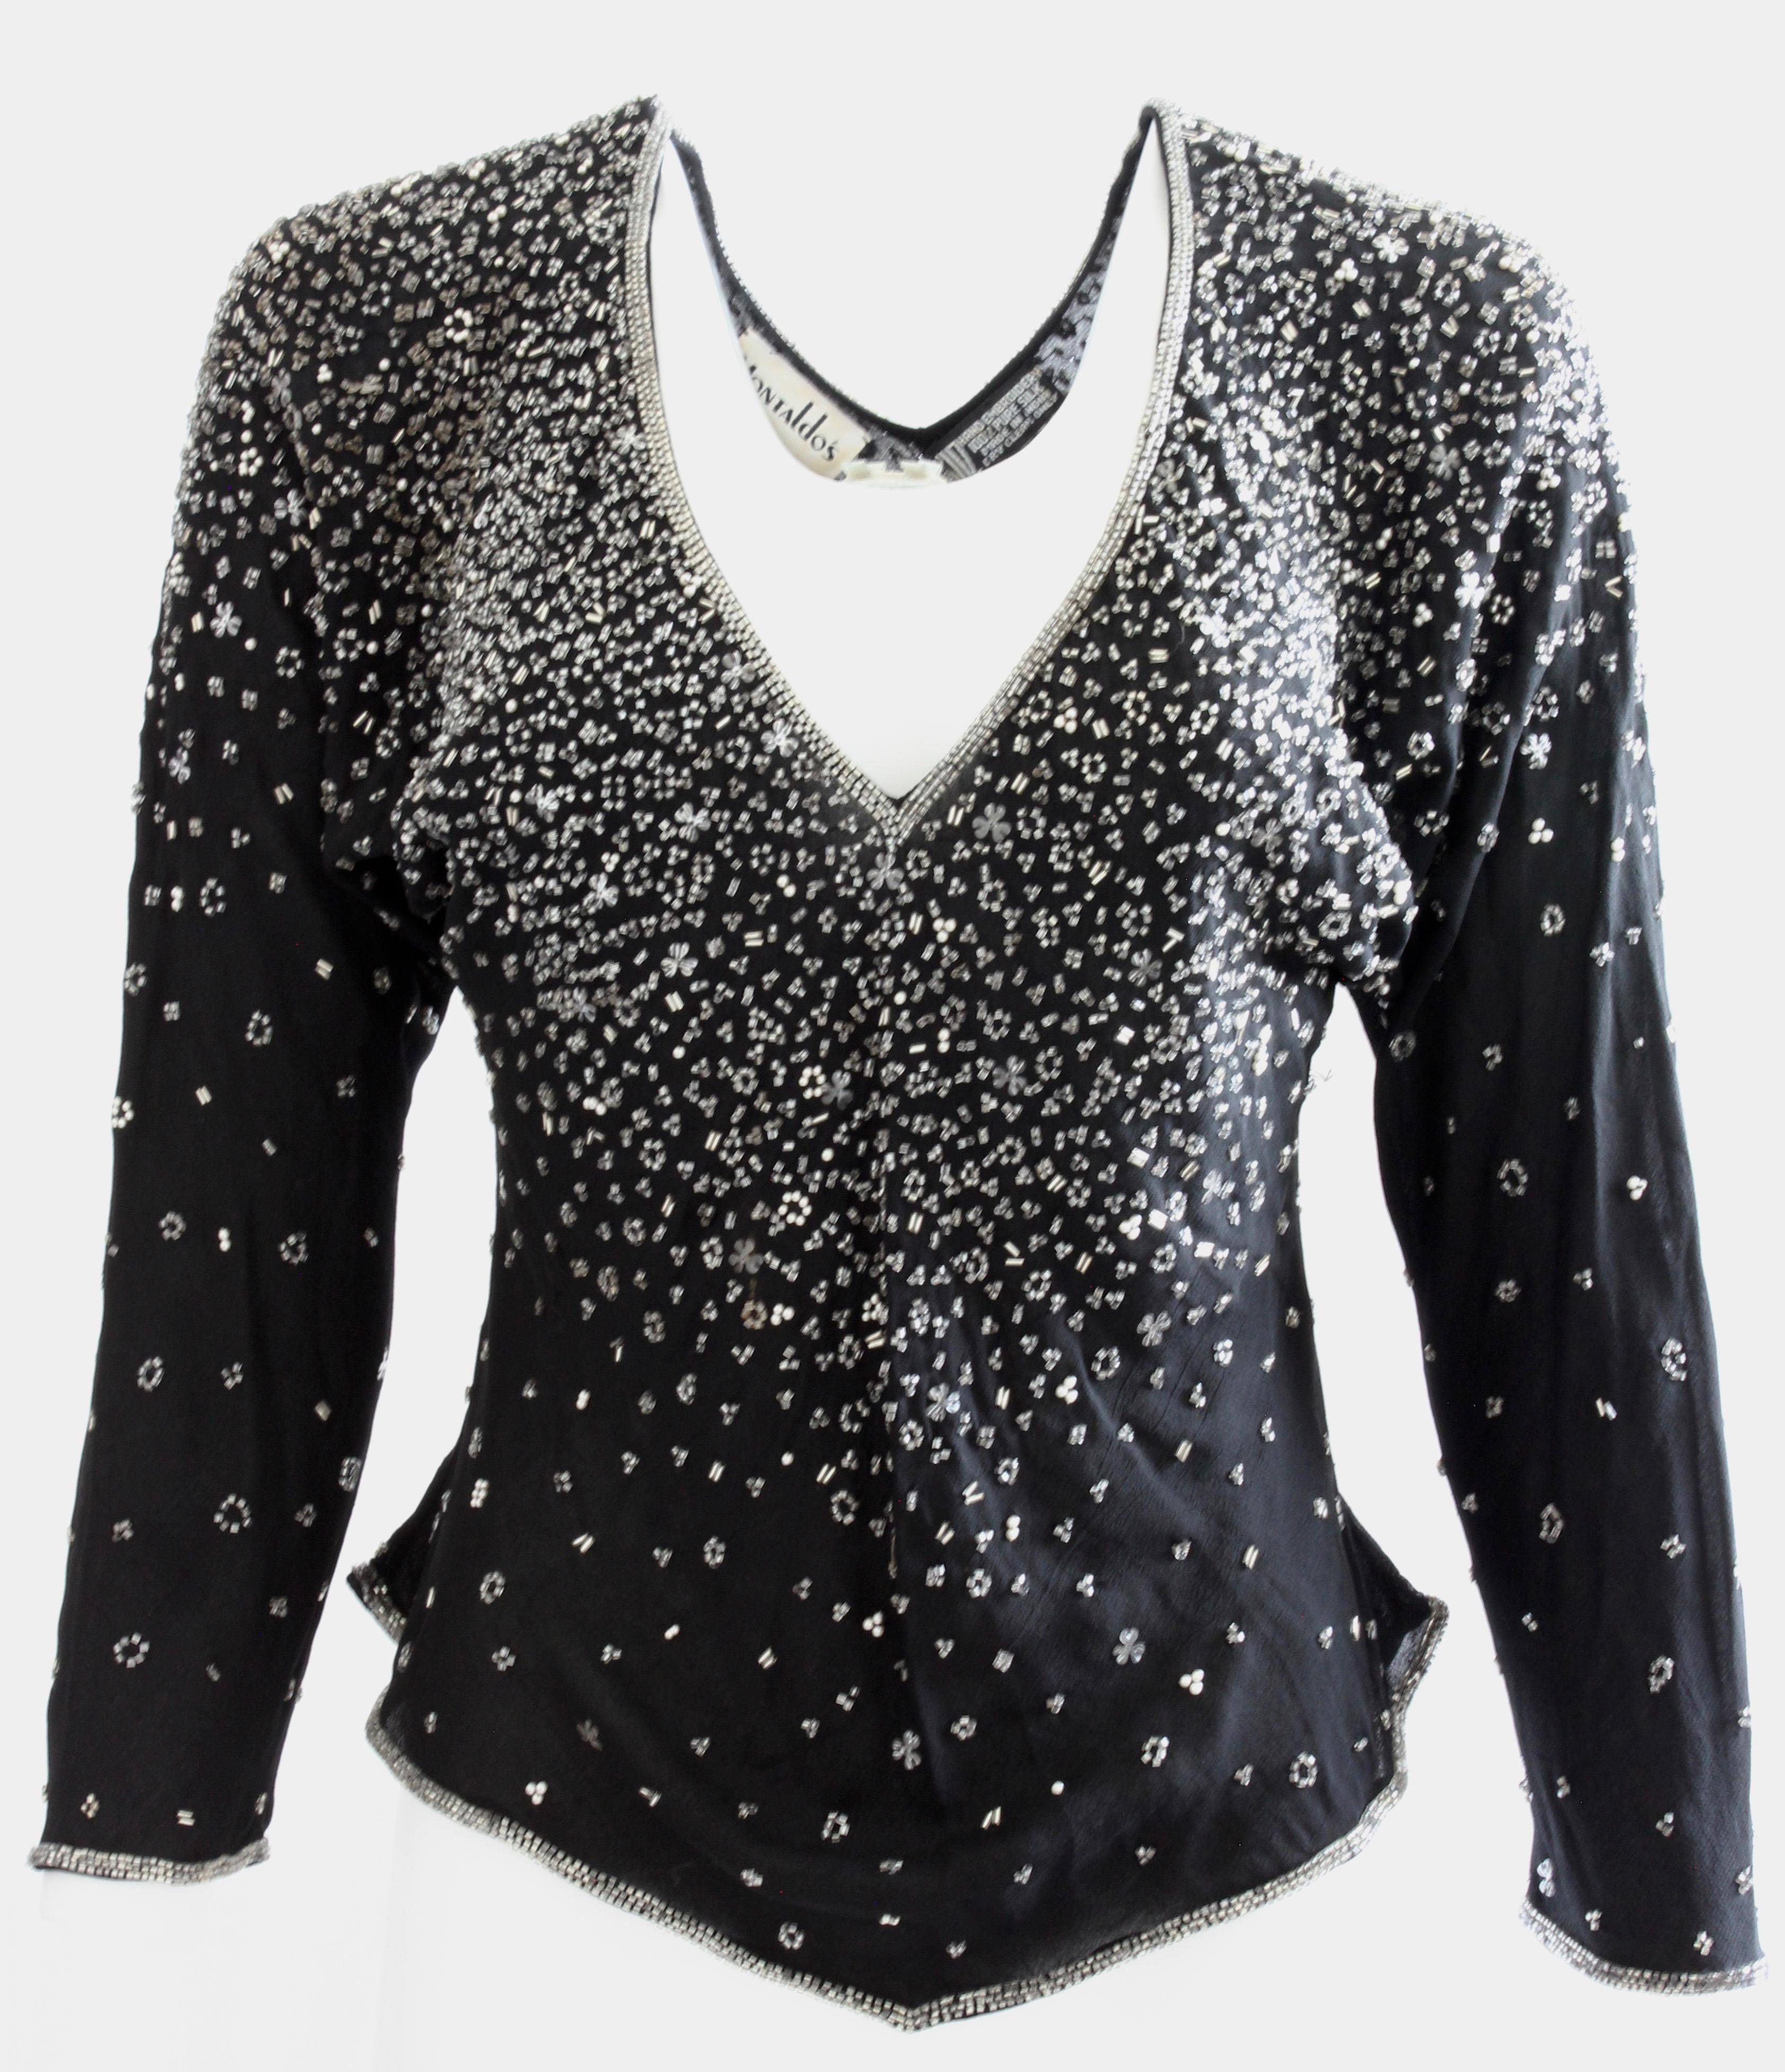 This exquisite black silk blouse was designed by Halston in the early 1970s and sold by Montaldo's, an upscale shop during that period.  Made from black silk and fully-lined, this piece features a confetti pattern of bugle beads, sequins and pear